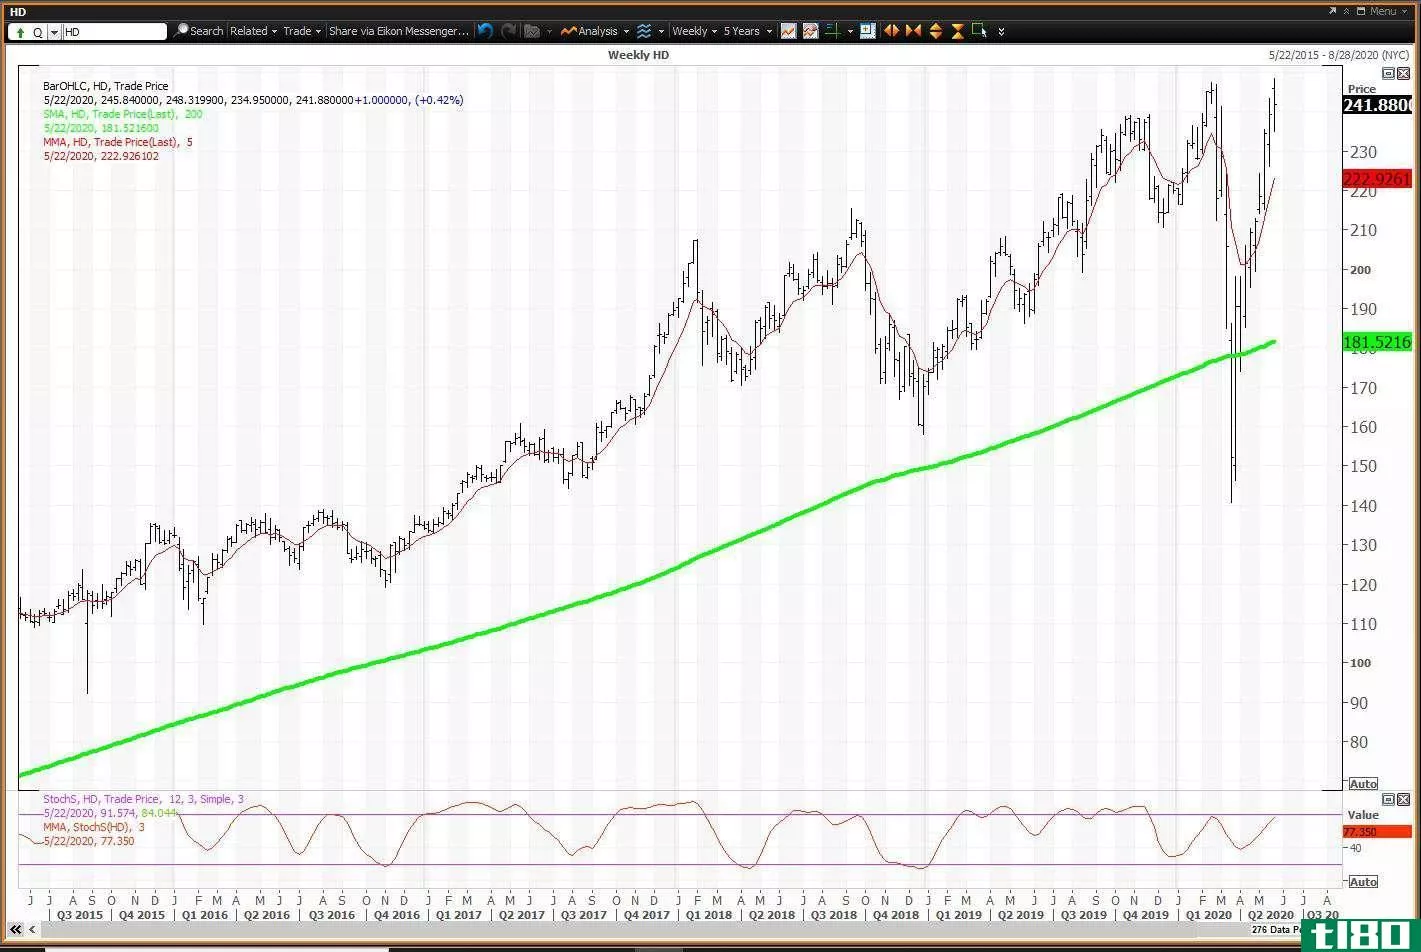 Weekly chart showing the share price performance of The Home Depot, Inc. (HD)